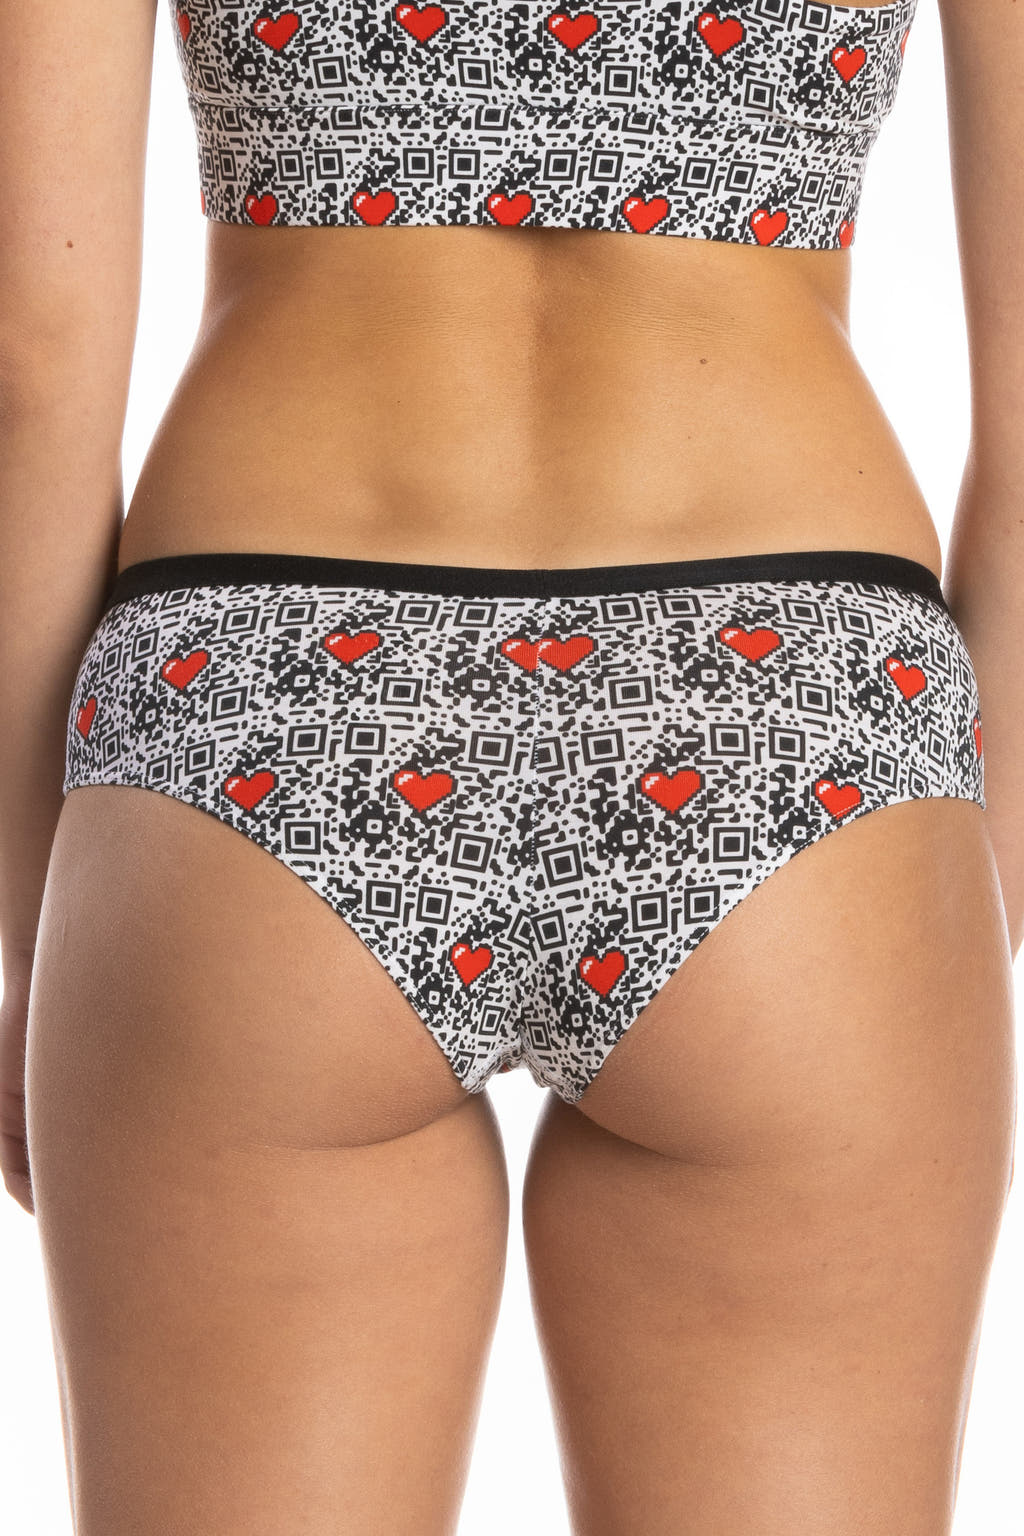 Codes and hearts cheeky underwear